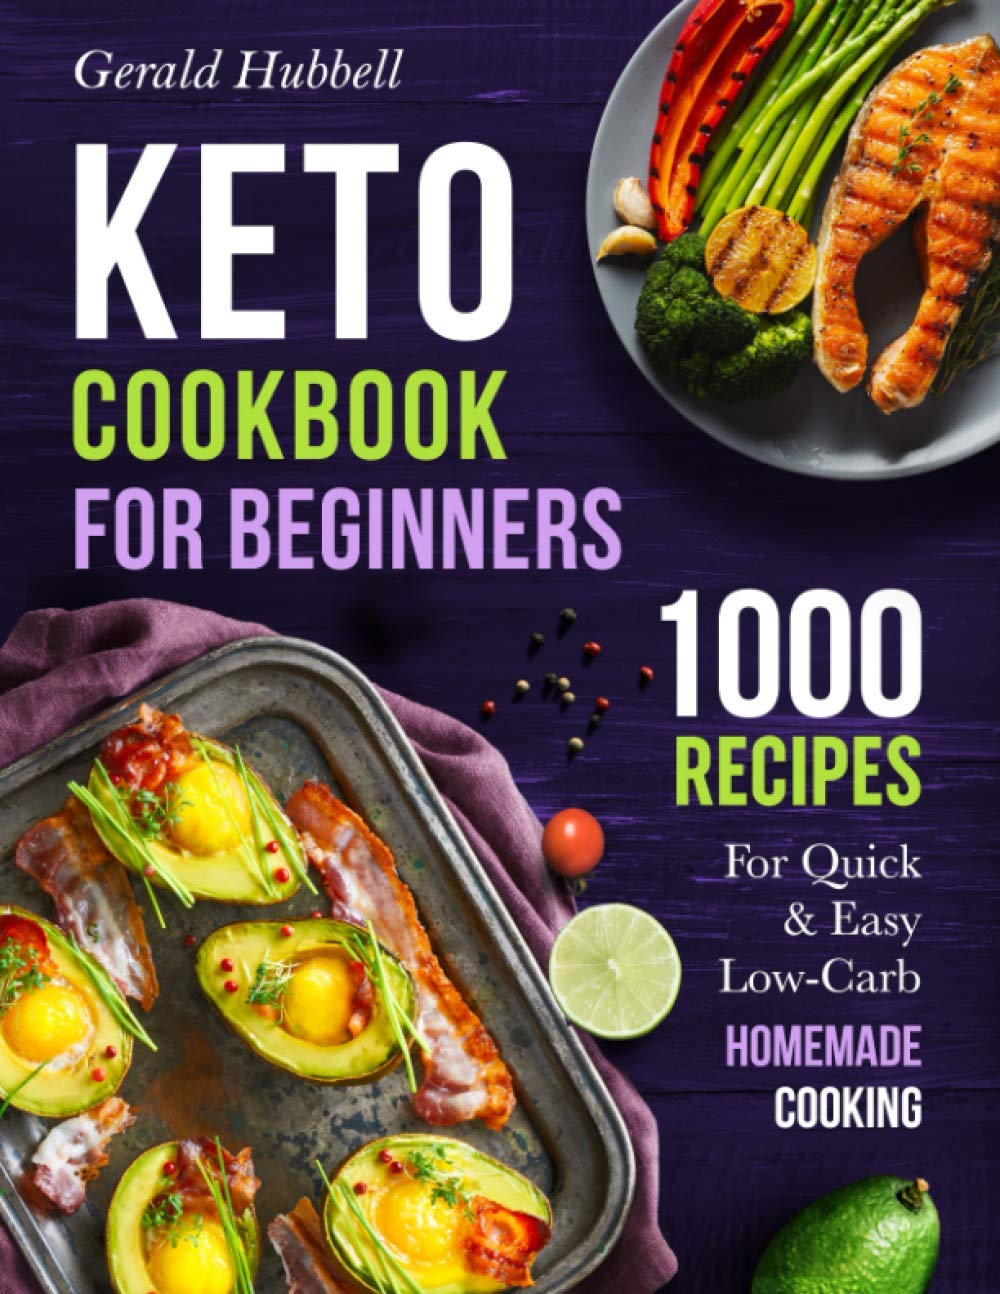 Keto Cookbook For Beginners: 1000 Recipes For Quick  Easy Low-Carb Homemade Cooking     Paperback – December 11, 2020